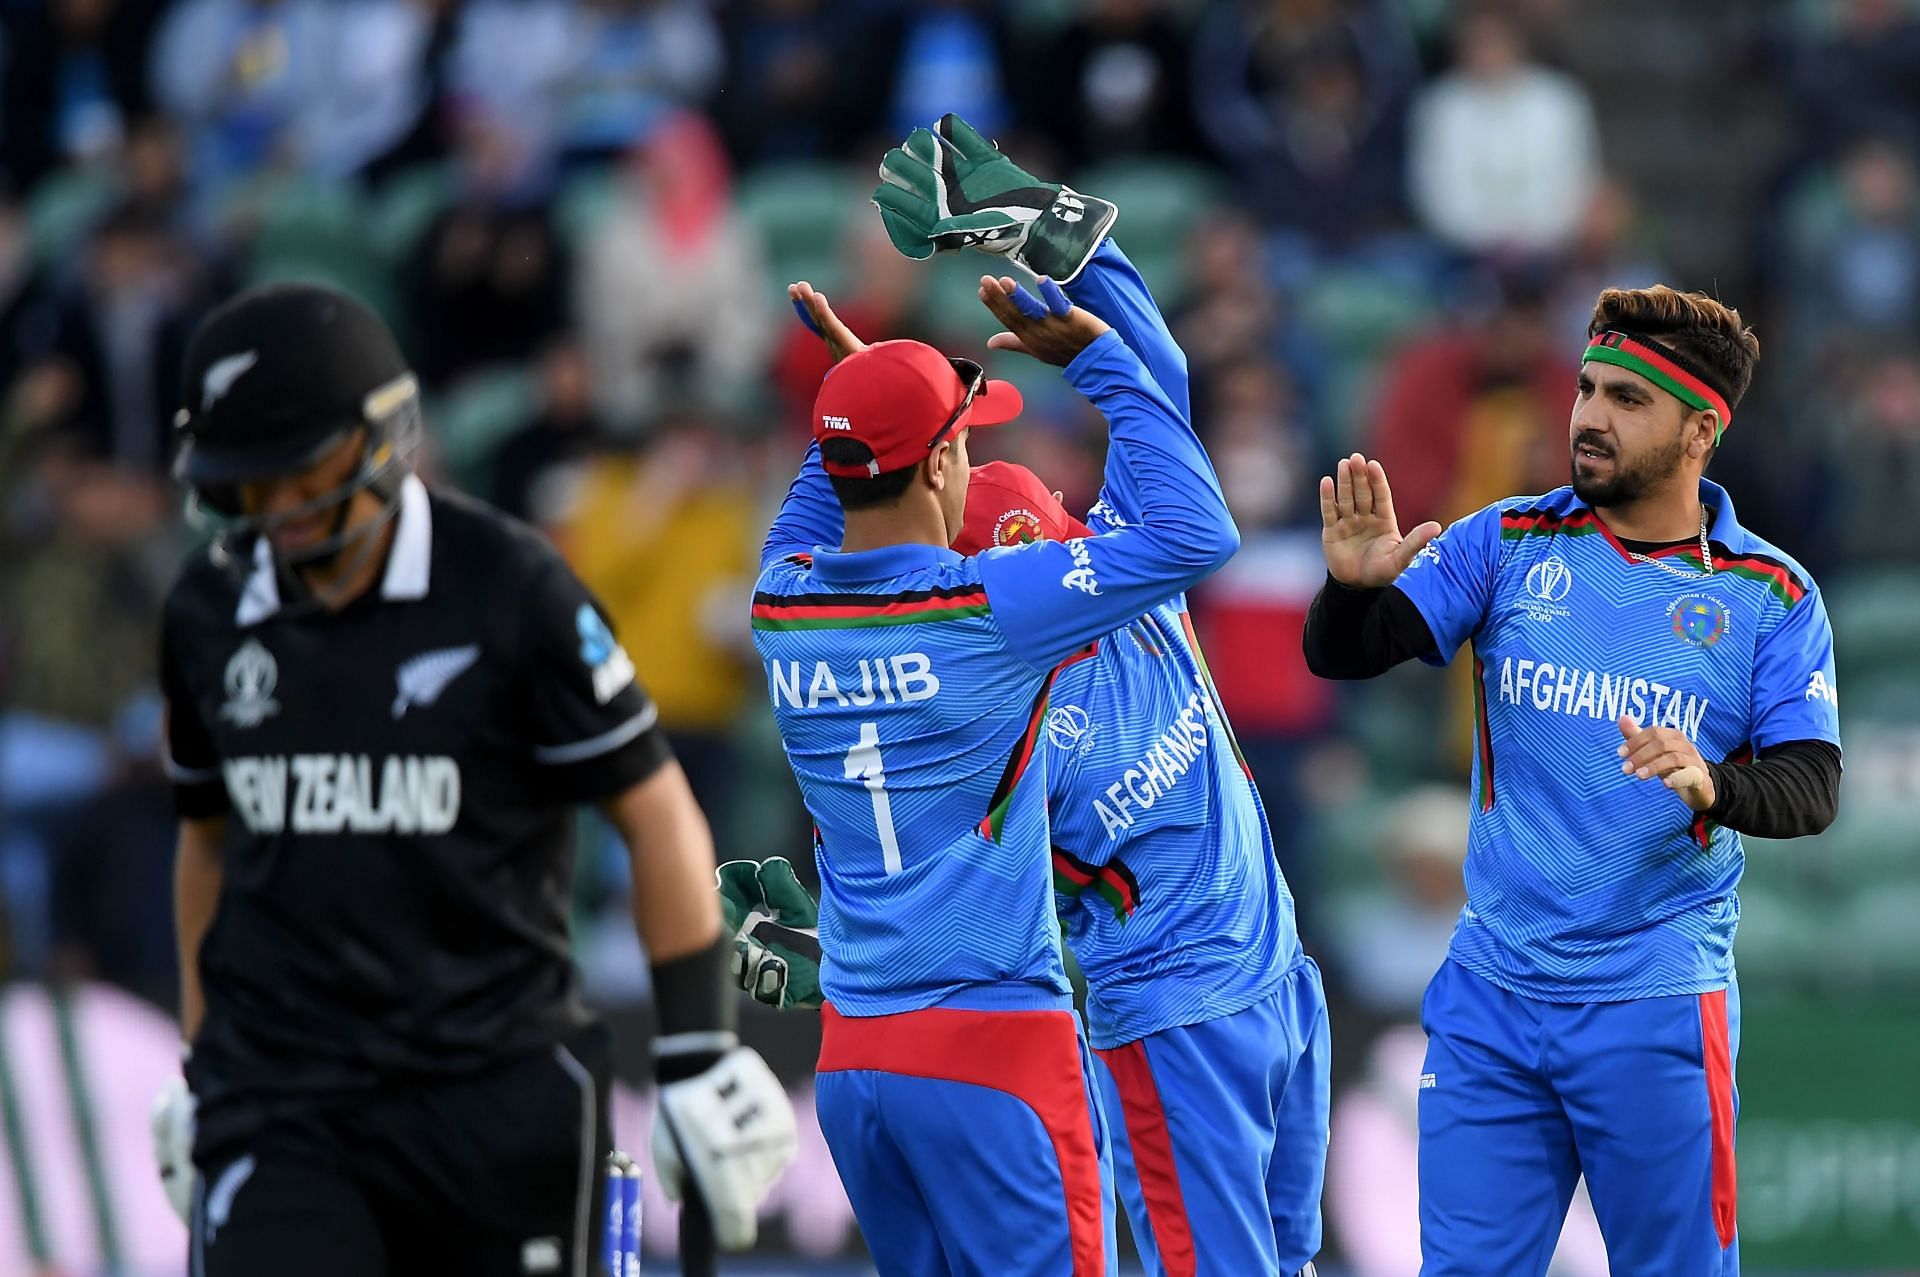 All Indian fans will follow today&#039;s New Zealand vs Afghanistan match very closely